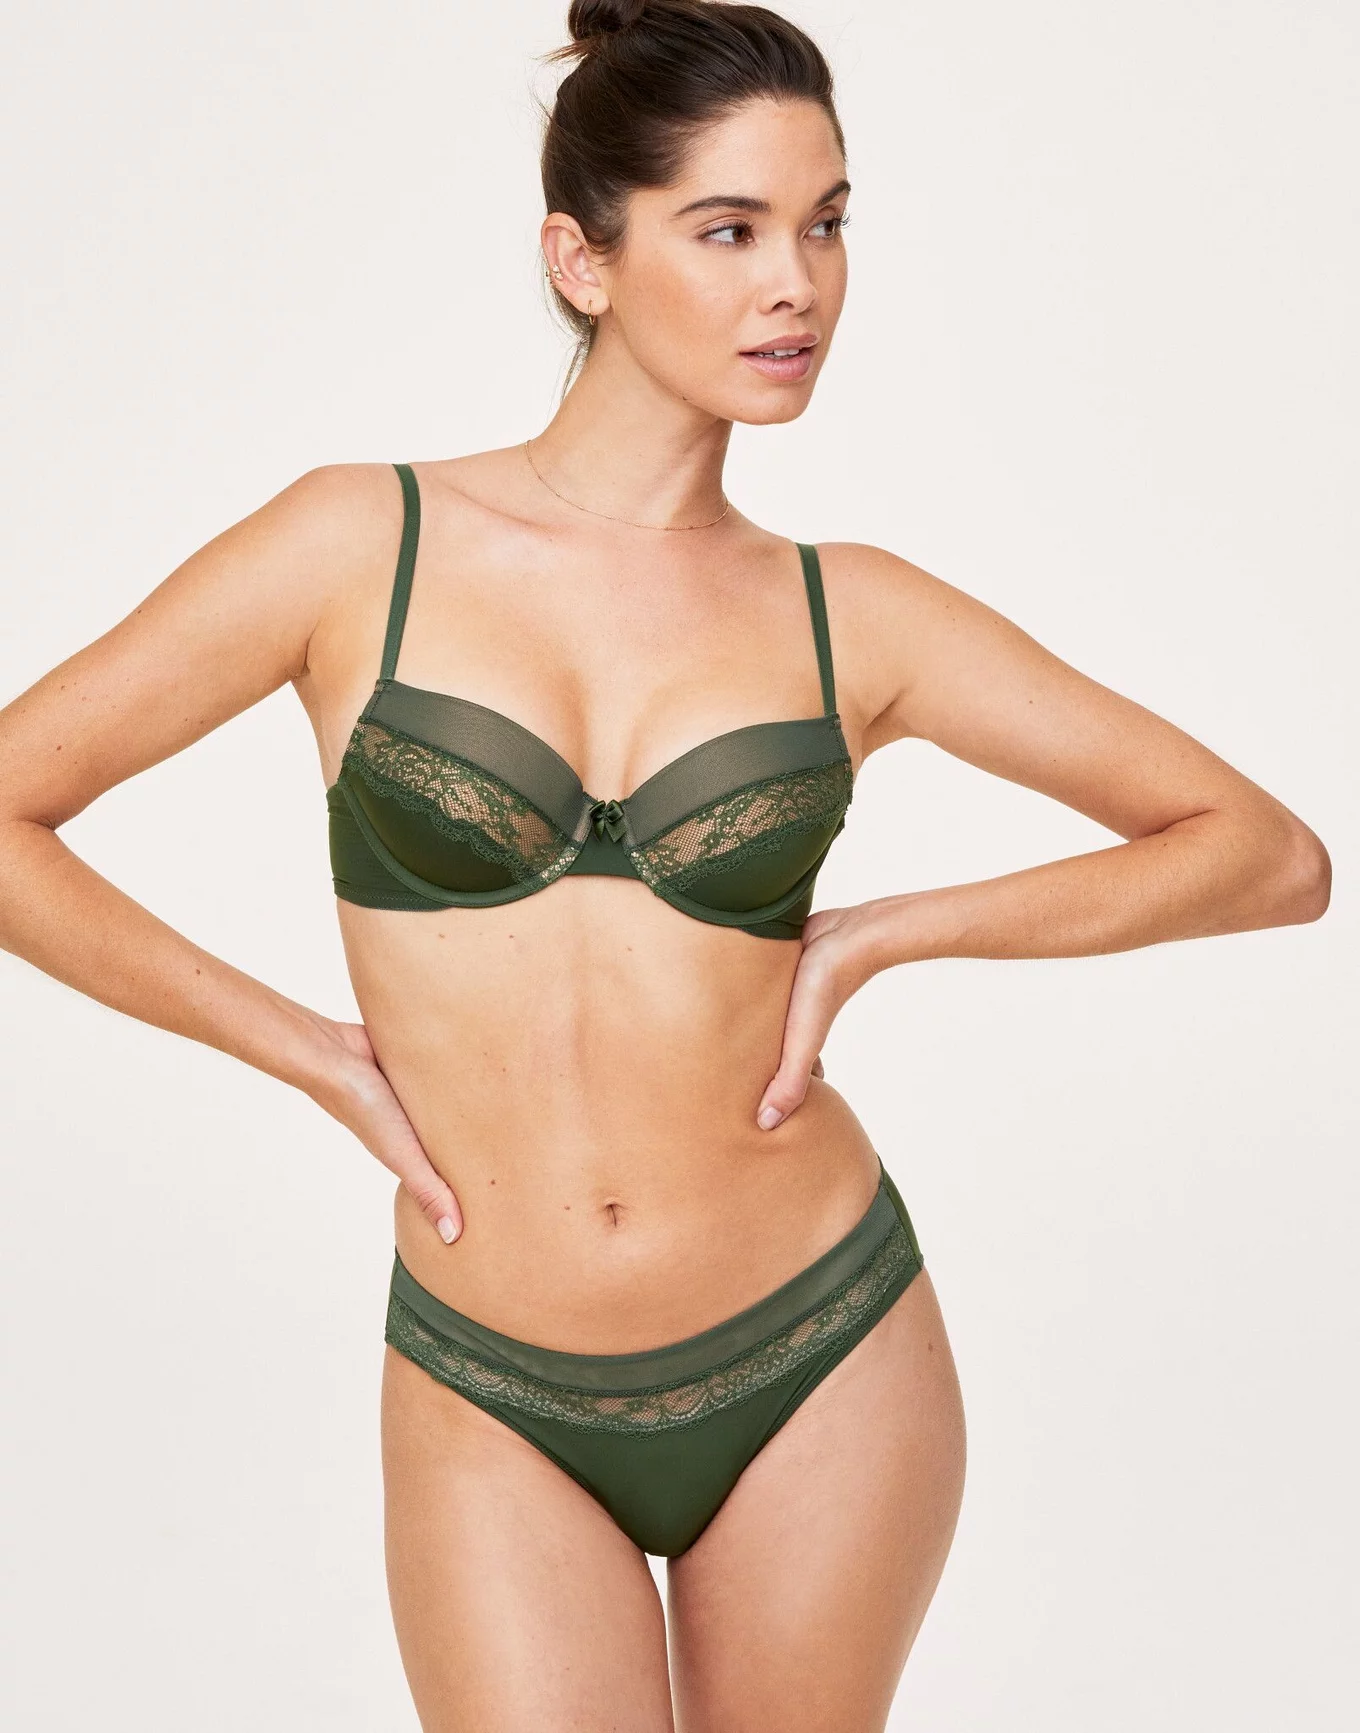 Adore Me - Andrelisa Contour Plus  Matching bra and panty, Bra and panty  sets, Chic bra